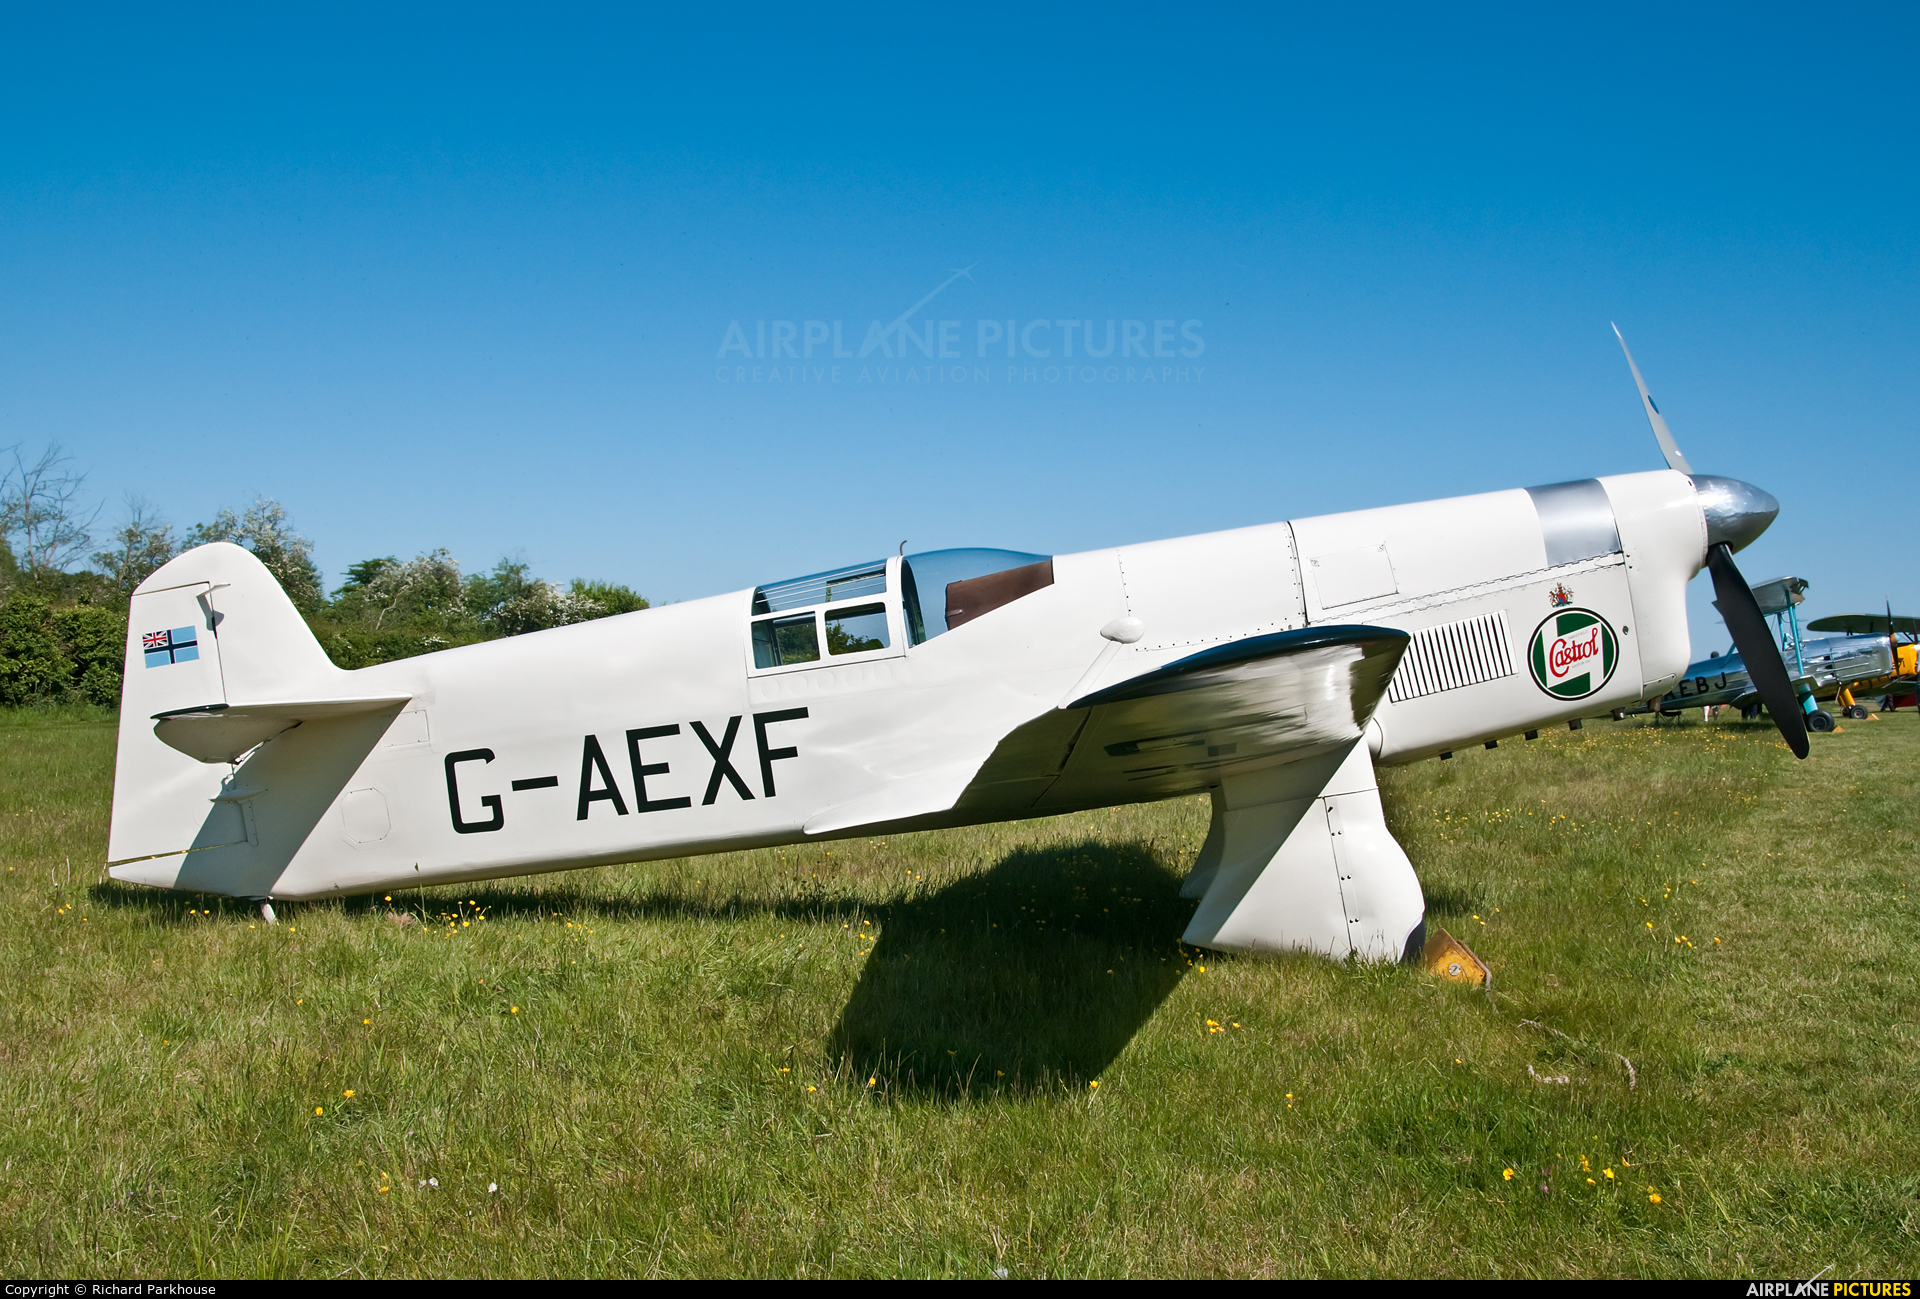 The Shuttleworth Collection G-AEXF aircraft at Old Warden